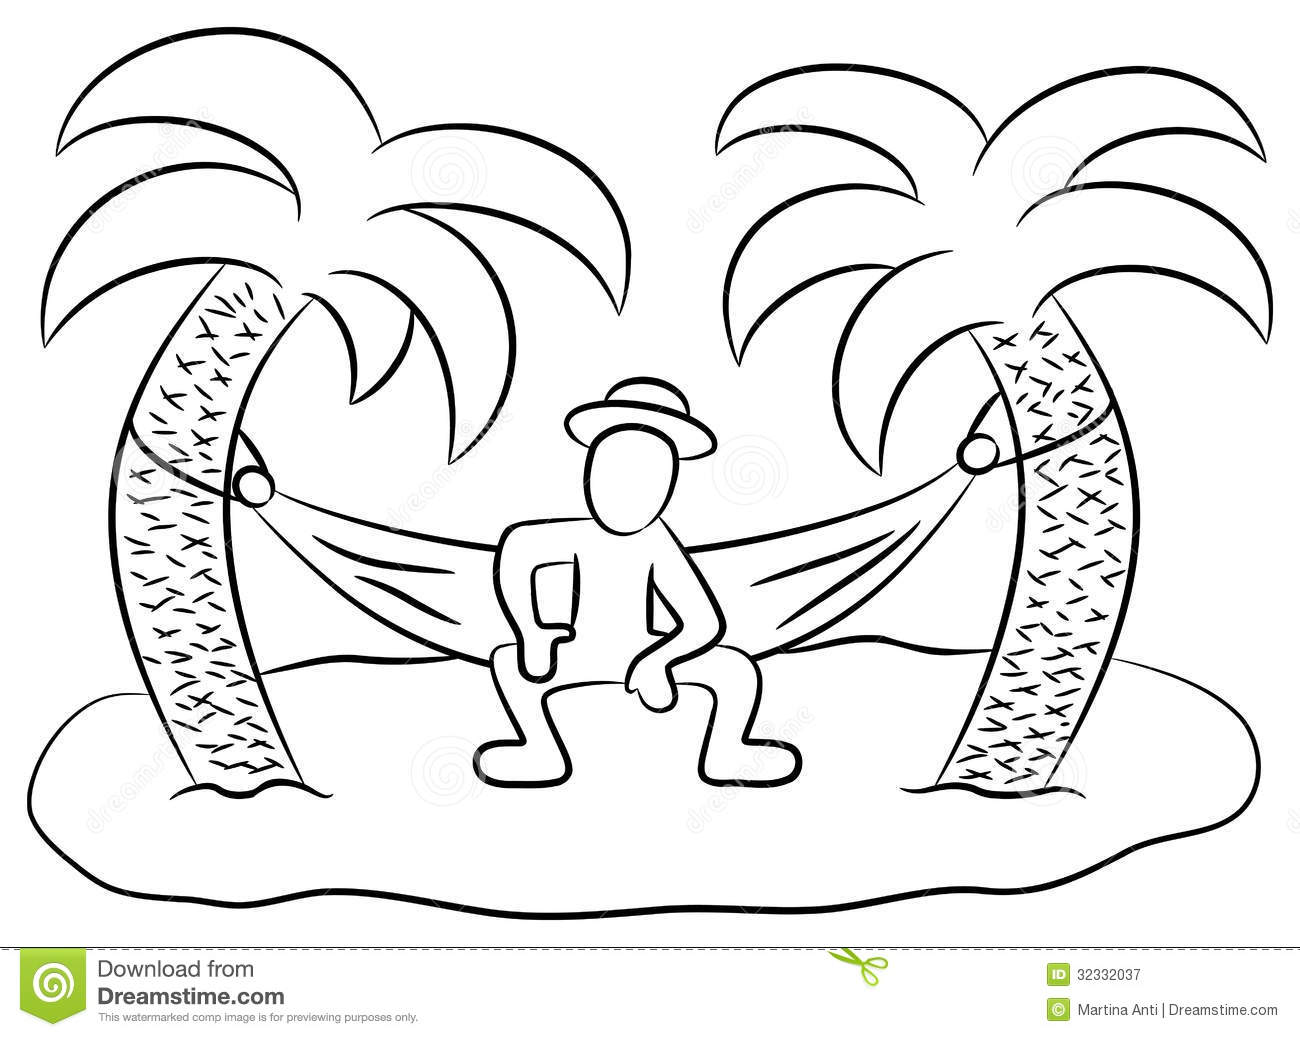 Vector Illustration Of A Man In A Hammock On A Small Lonely Island